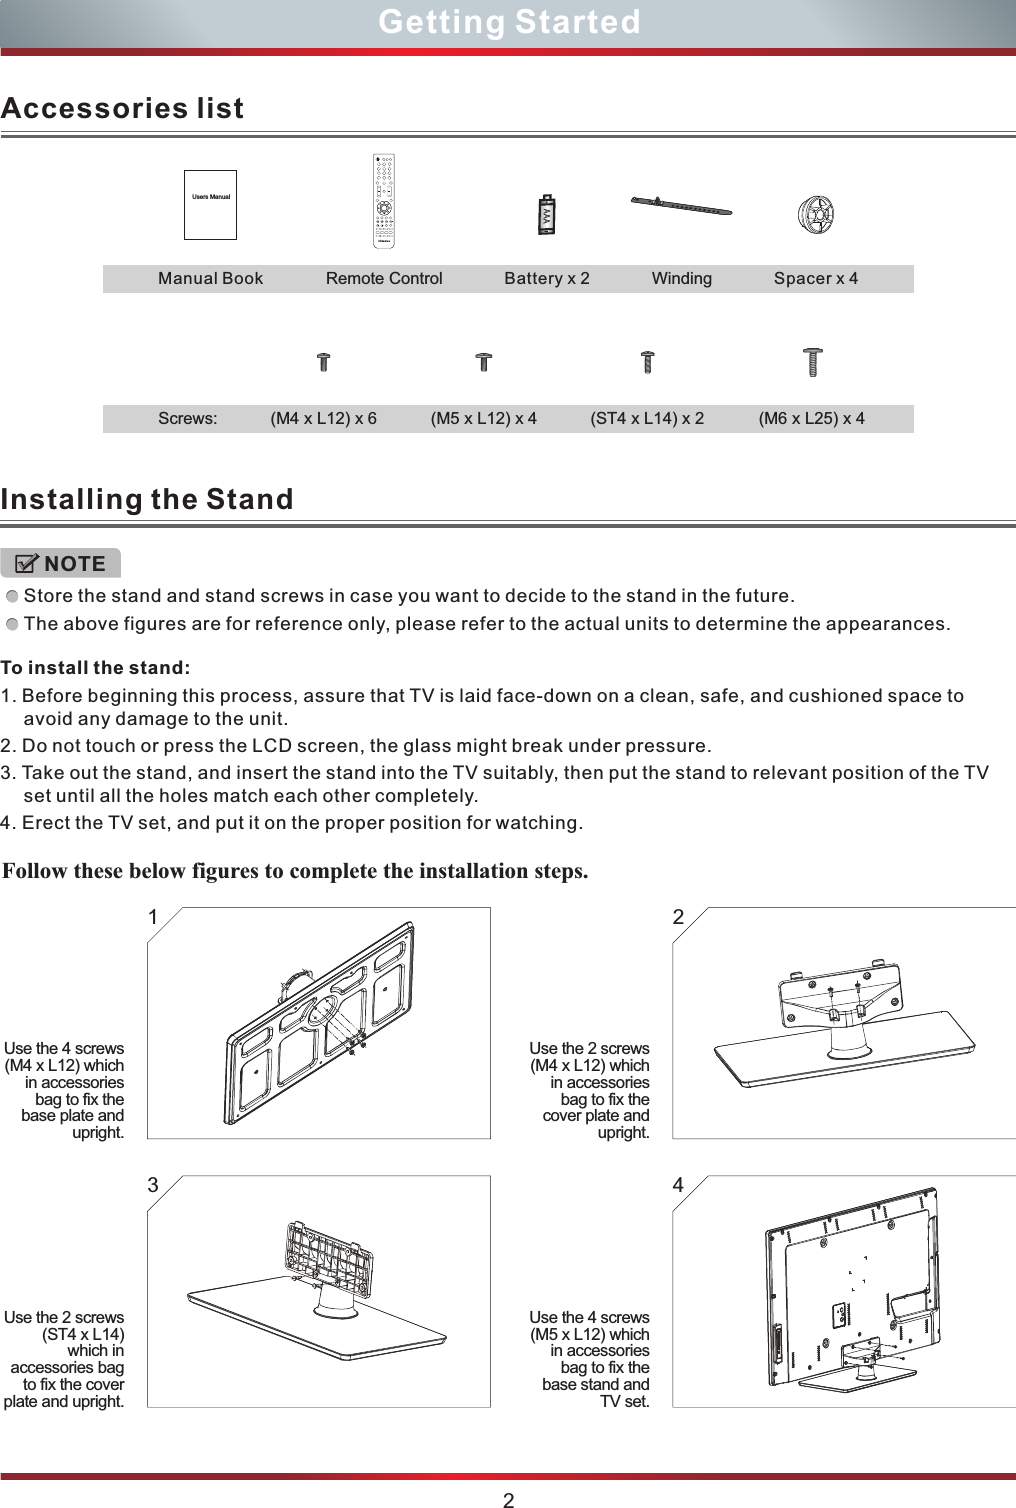 2Getting StartedAccessories listUsers ManualAAARemote ControlManual Book Battery x 2 Spacer x 4Winding(M4 x L12) x 6 (M5 x L12) x 4 (M6 x L25) x 4(ST4 x L14) x 2Screws:Installing the StandStore the stand and stand screws in case you want to decide to the stand in the future.The above figures are for reference only, please refer to the actual units to determine the appearances.NOTETo install the stand:1. Before beginning this process, assure that TV is laid face-down on a clean, safe, and cushioned space to avoid any damage to the unit.2. Do not touch or press the LCD screen, the glass might break under pressure.3. Take out the stand, and insert the stand into the TV suitably, then put the stand to relevant position of the TV set until all the holes match each other completely.4. Erect the TV set, and put it on the proper position for watching.1 23 4Use the 4 screws (M4 x L12) which in accessories bag to fix the base plate and upright.Use the 2 screws (M4 x L12) which in accessories bag to fix the cover plate and upright.Use the 2 screws (ST4 x L14) which in accessories bag to fix the cover plate and upright.Use the 4 screws (M5 x L12) which in accessories bag to fix the base stand and TV set. Follow these below figures to complete the installation steps. 